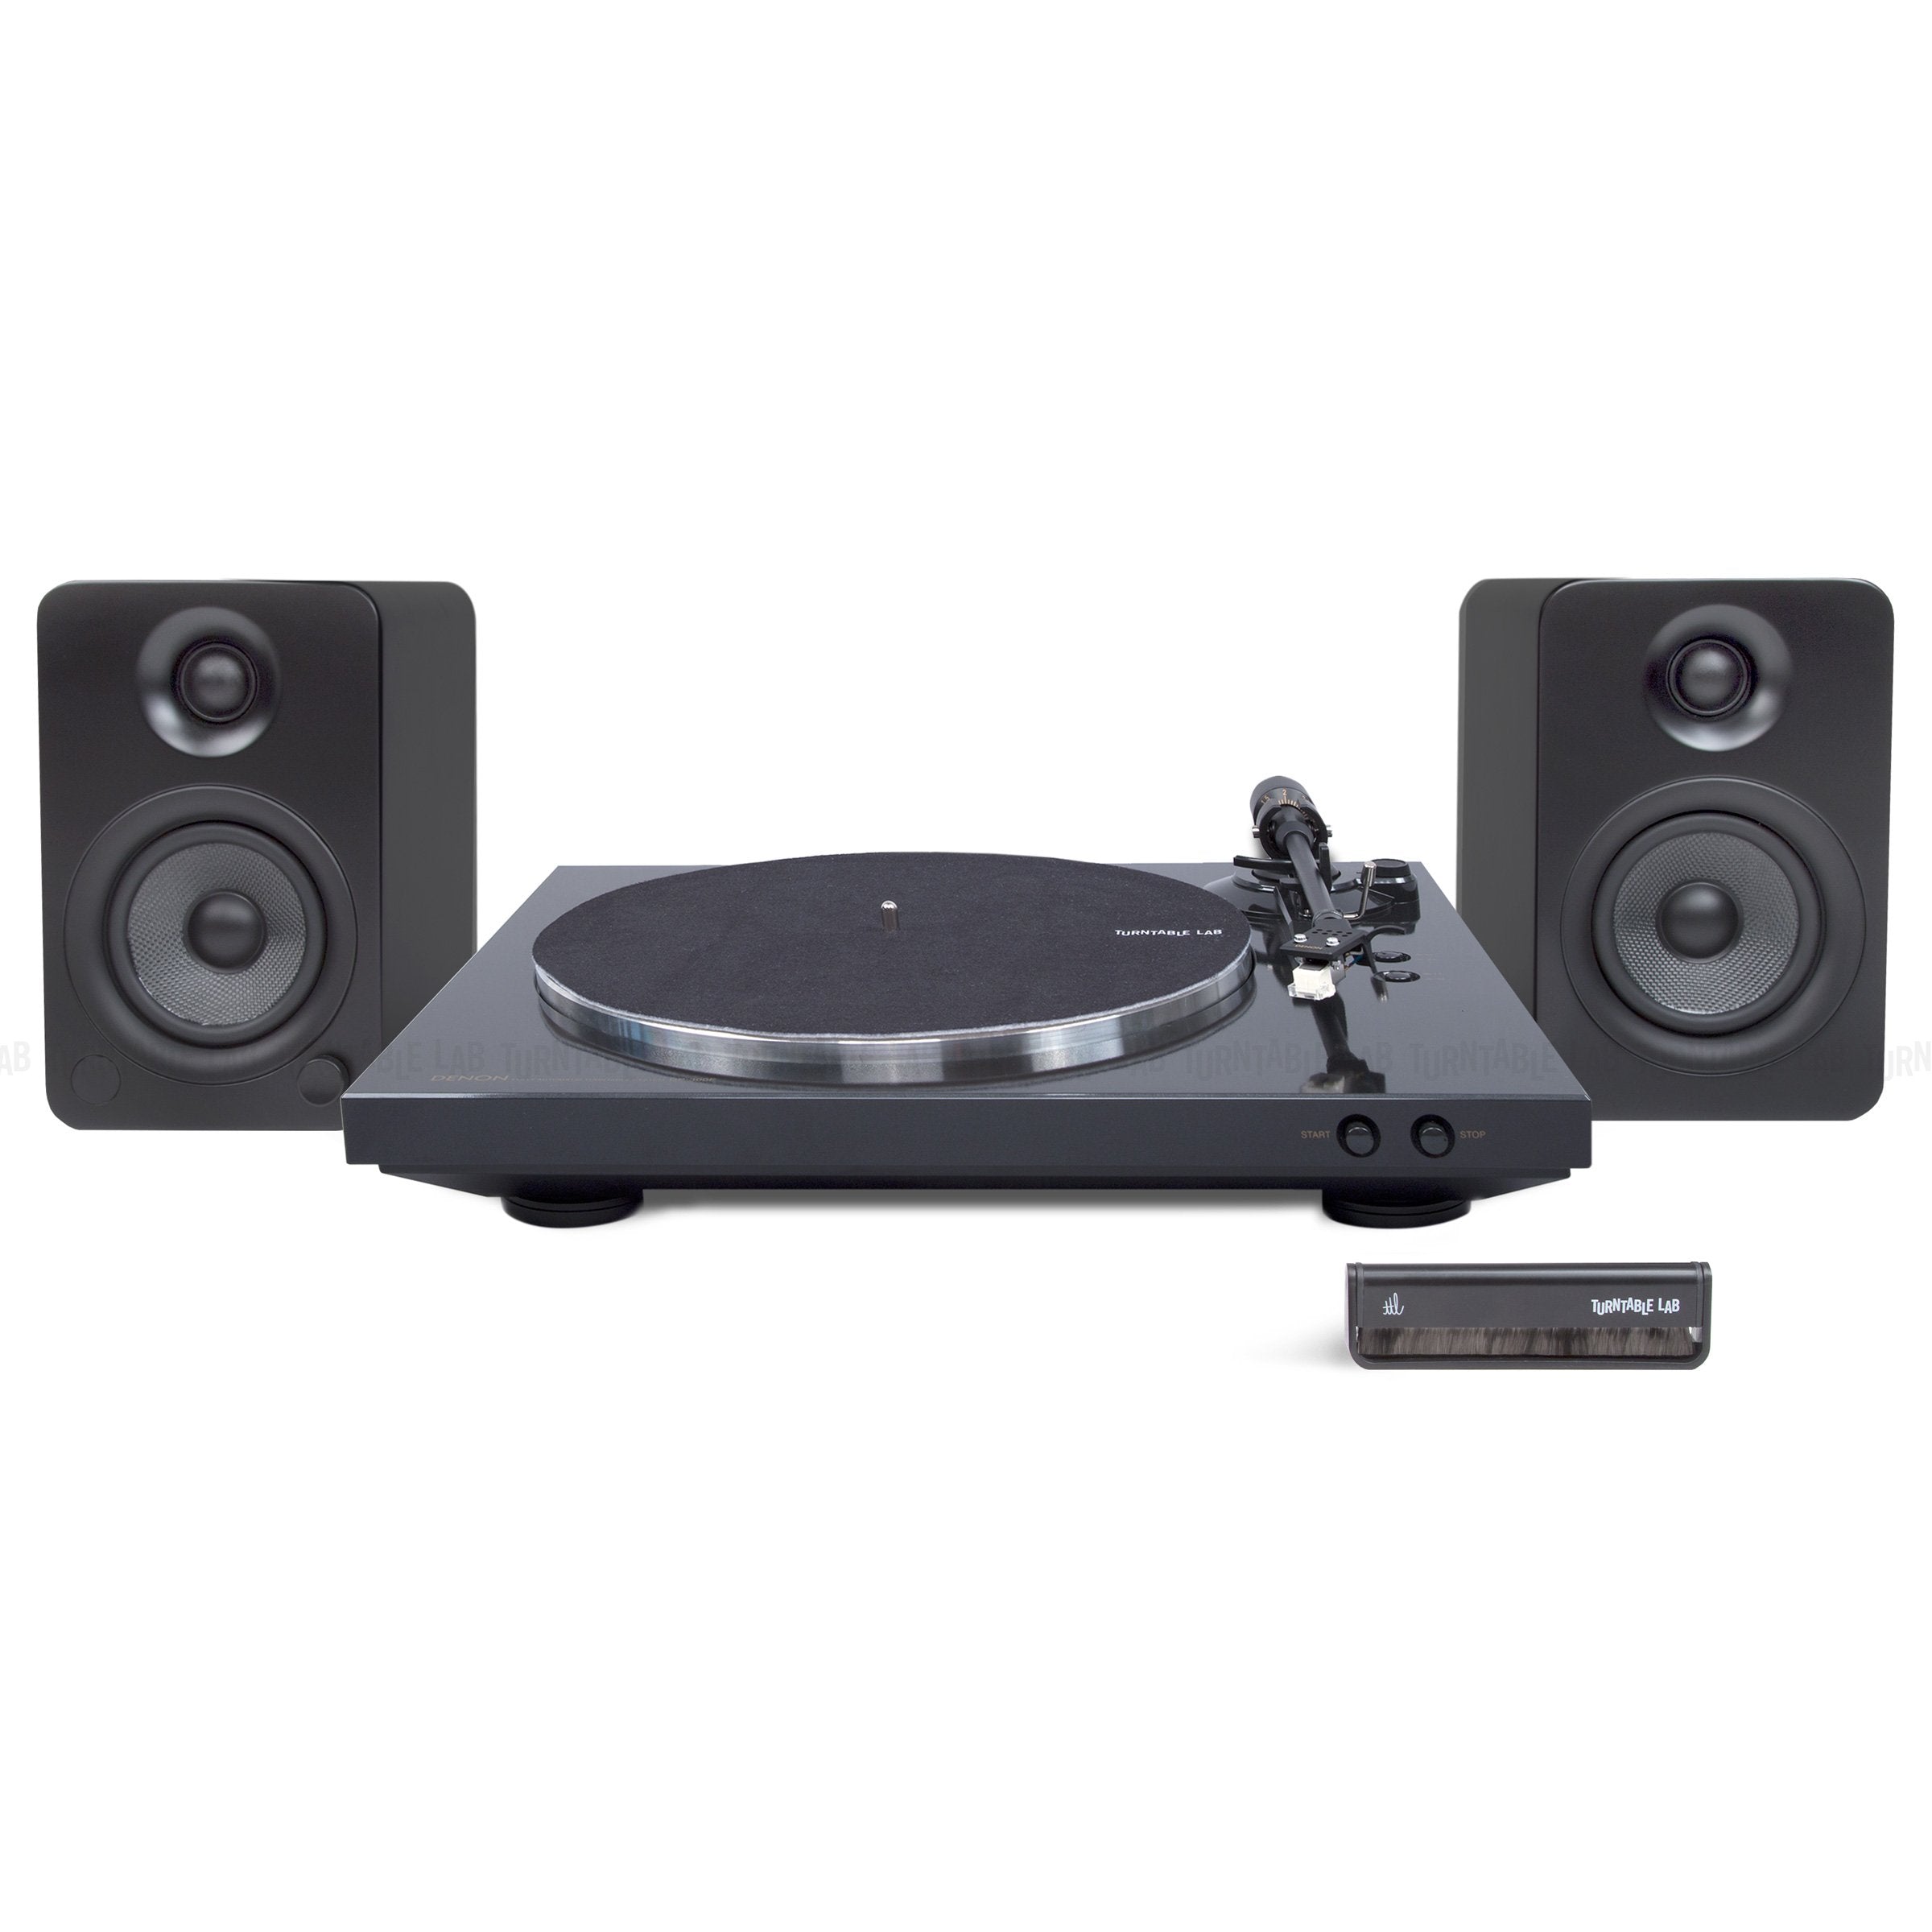 Denon: DP-300F / Kanto YU4 / Turntable Package